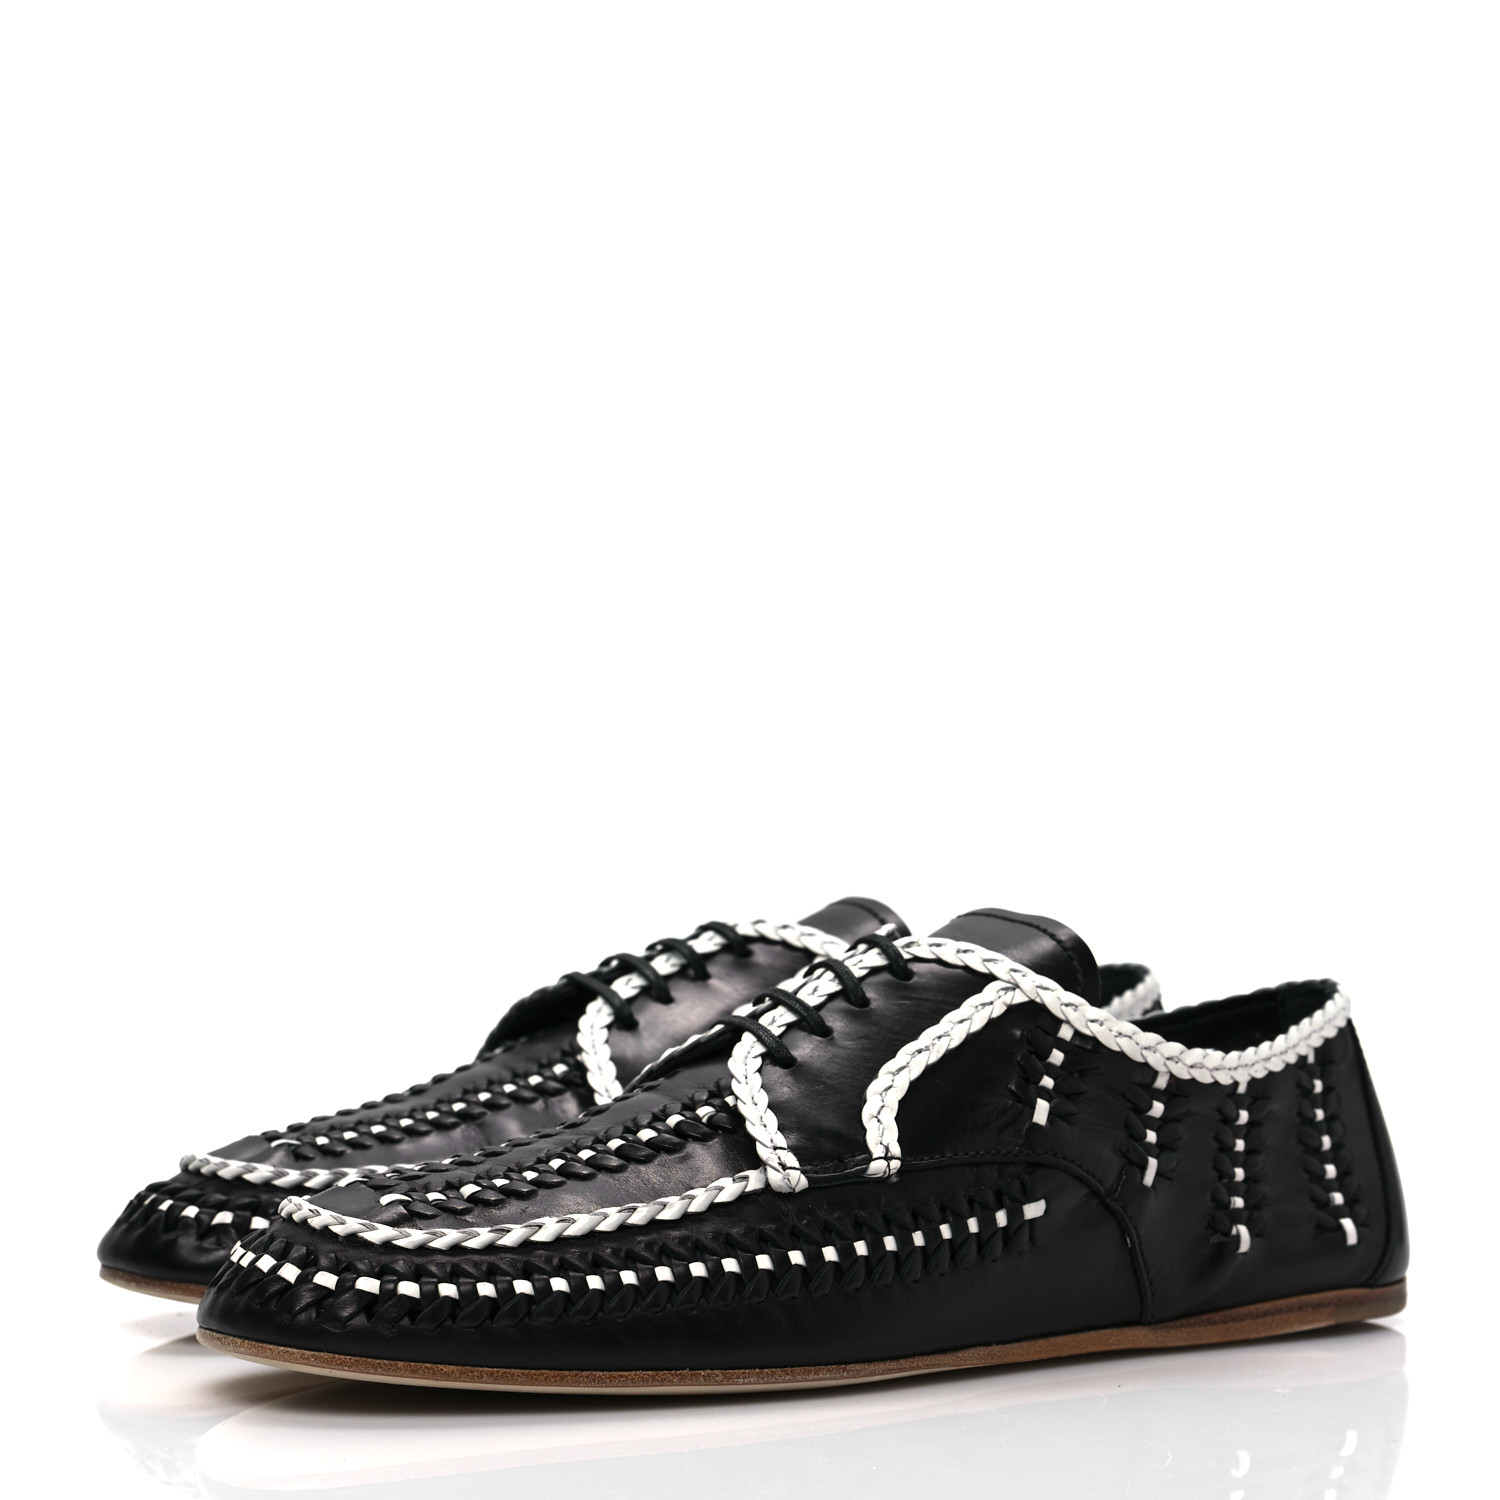 side view image of PRADA Calfskin Woven Loafers in the colors Black and White by FASHIONPHILE